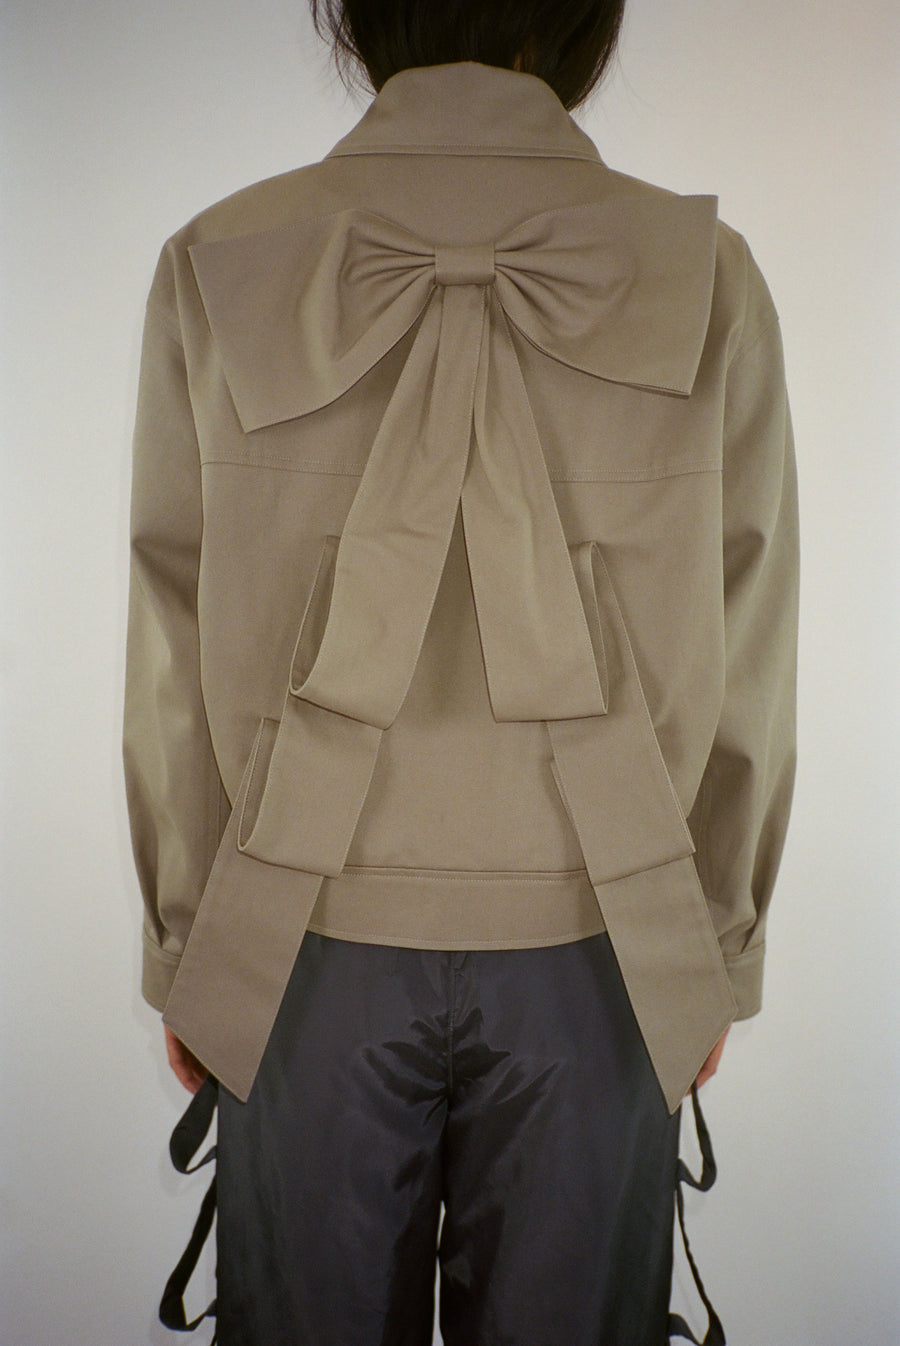 Spread collar jacket in taupe with oversized bow at back on model